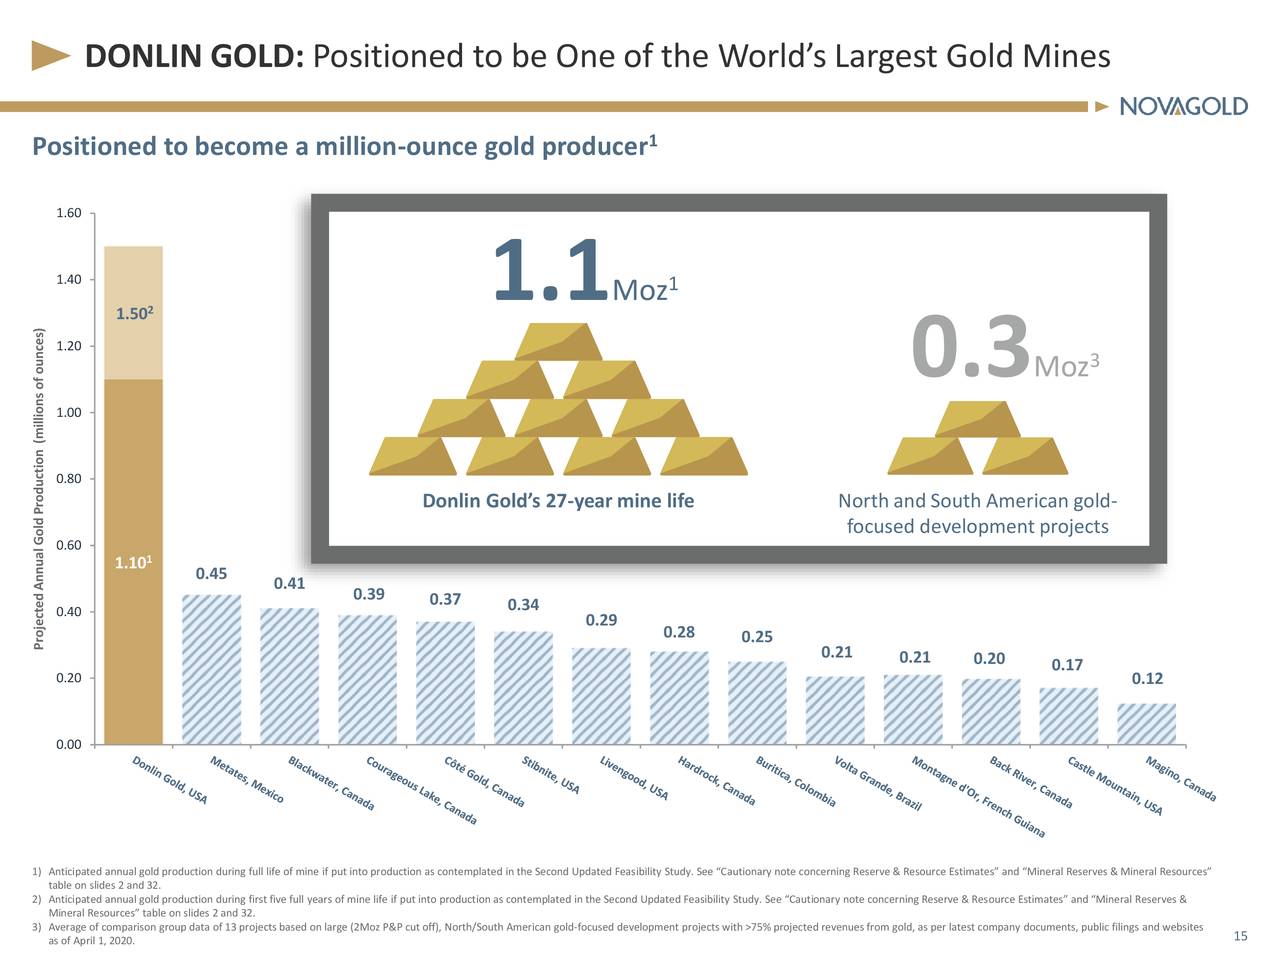 DONLIN GOLD: Positioned to be One of the World’s Largest Gold Mines